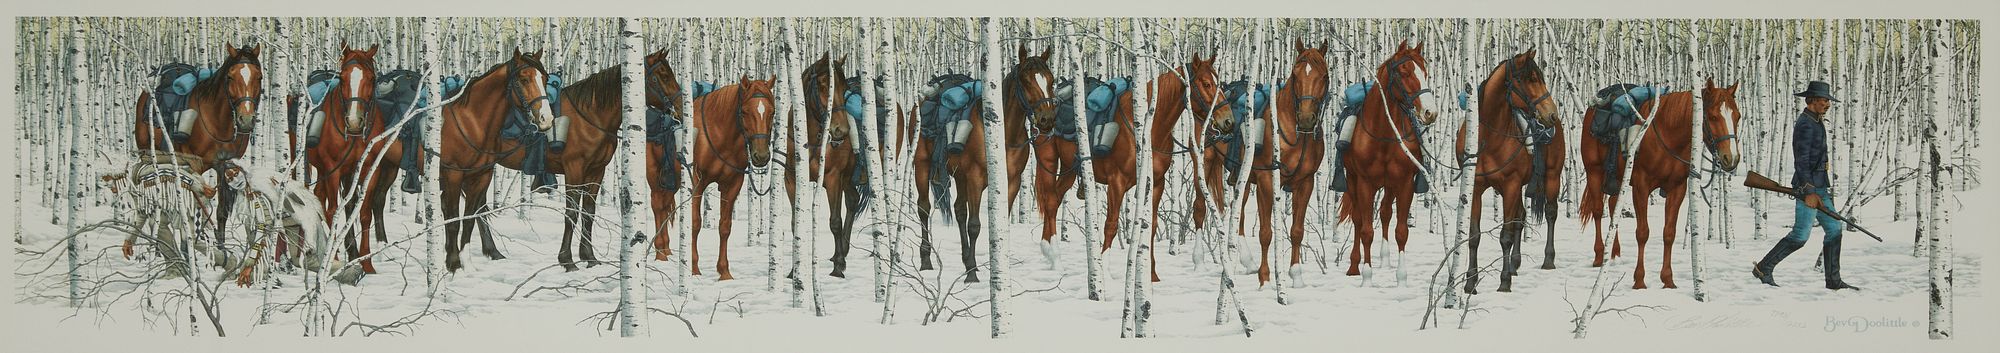 Bev Doolittle "Two Indian Horses" Lithograph